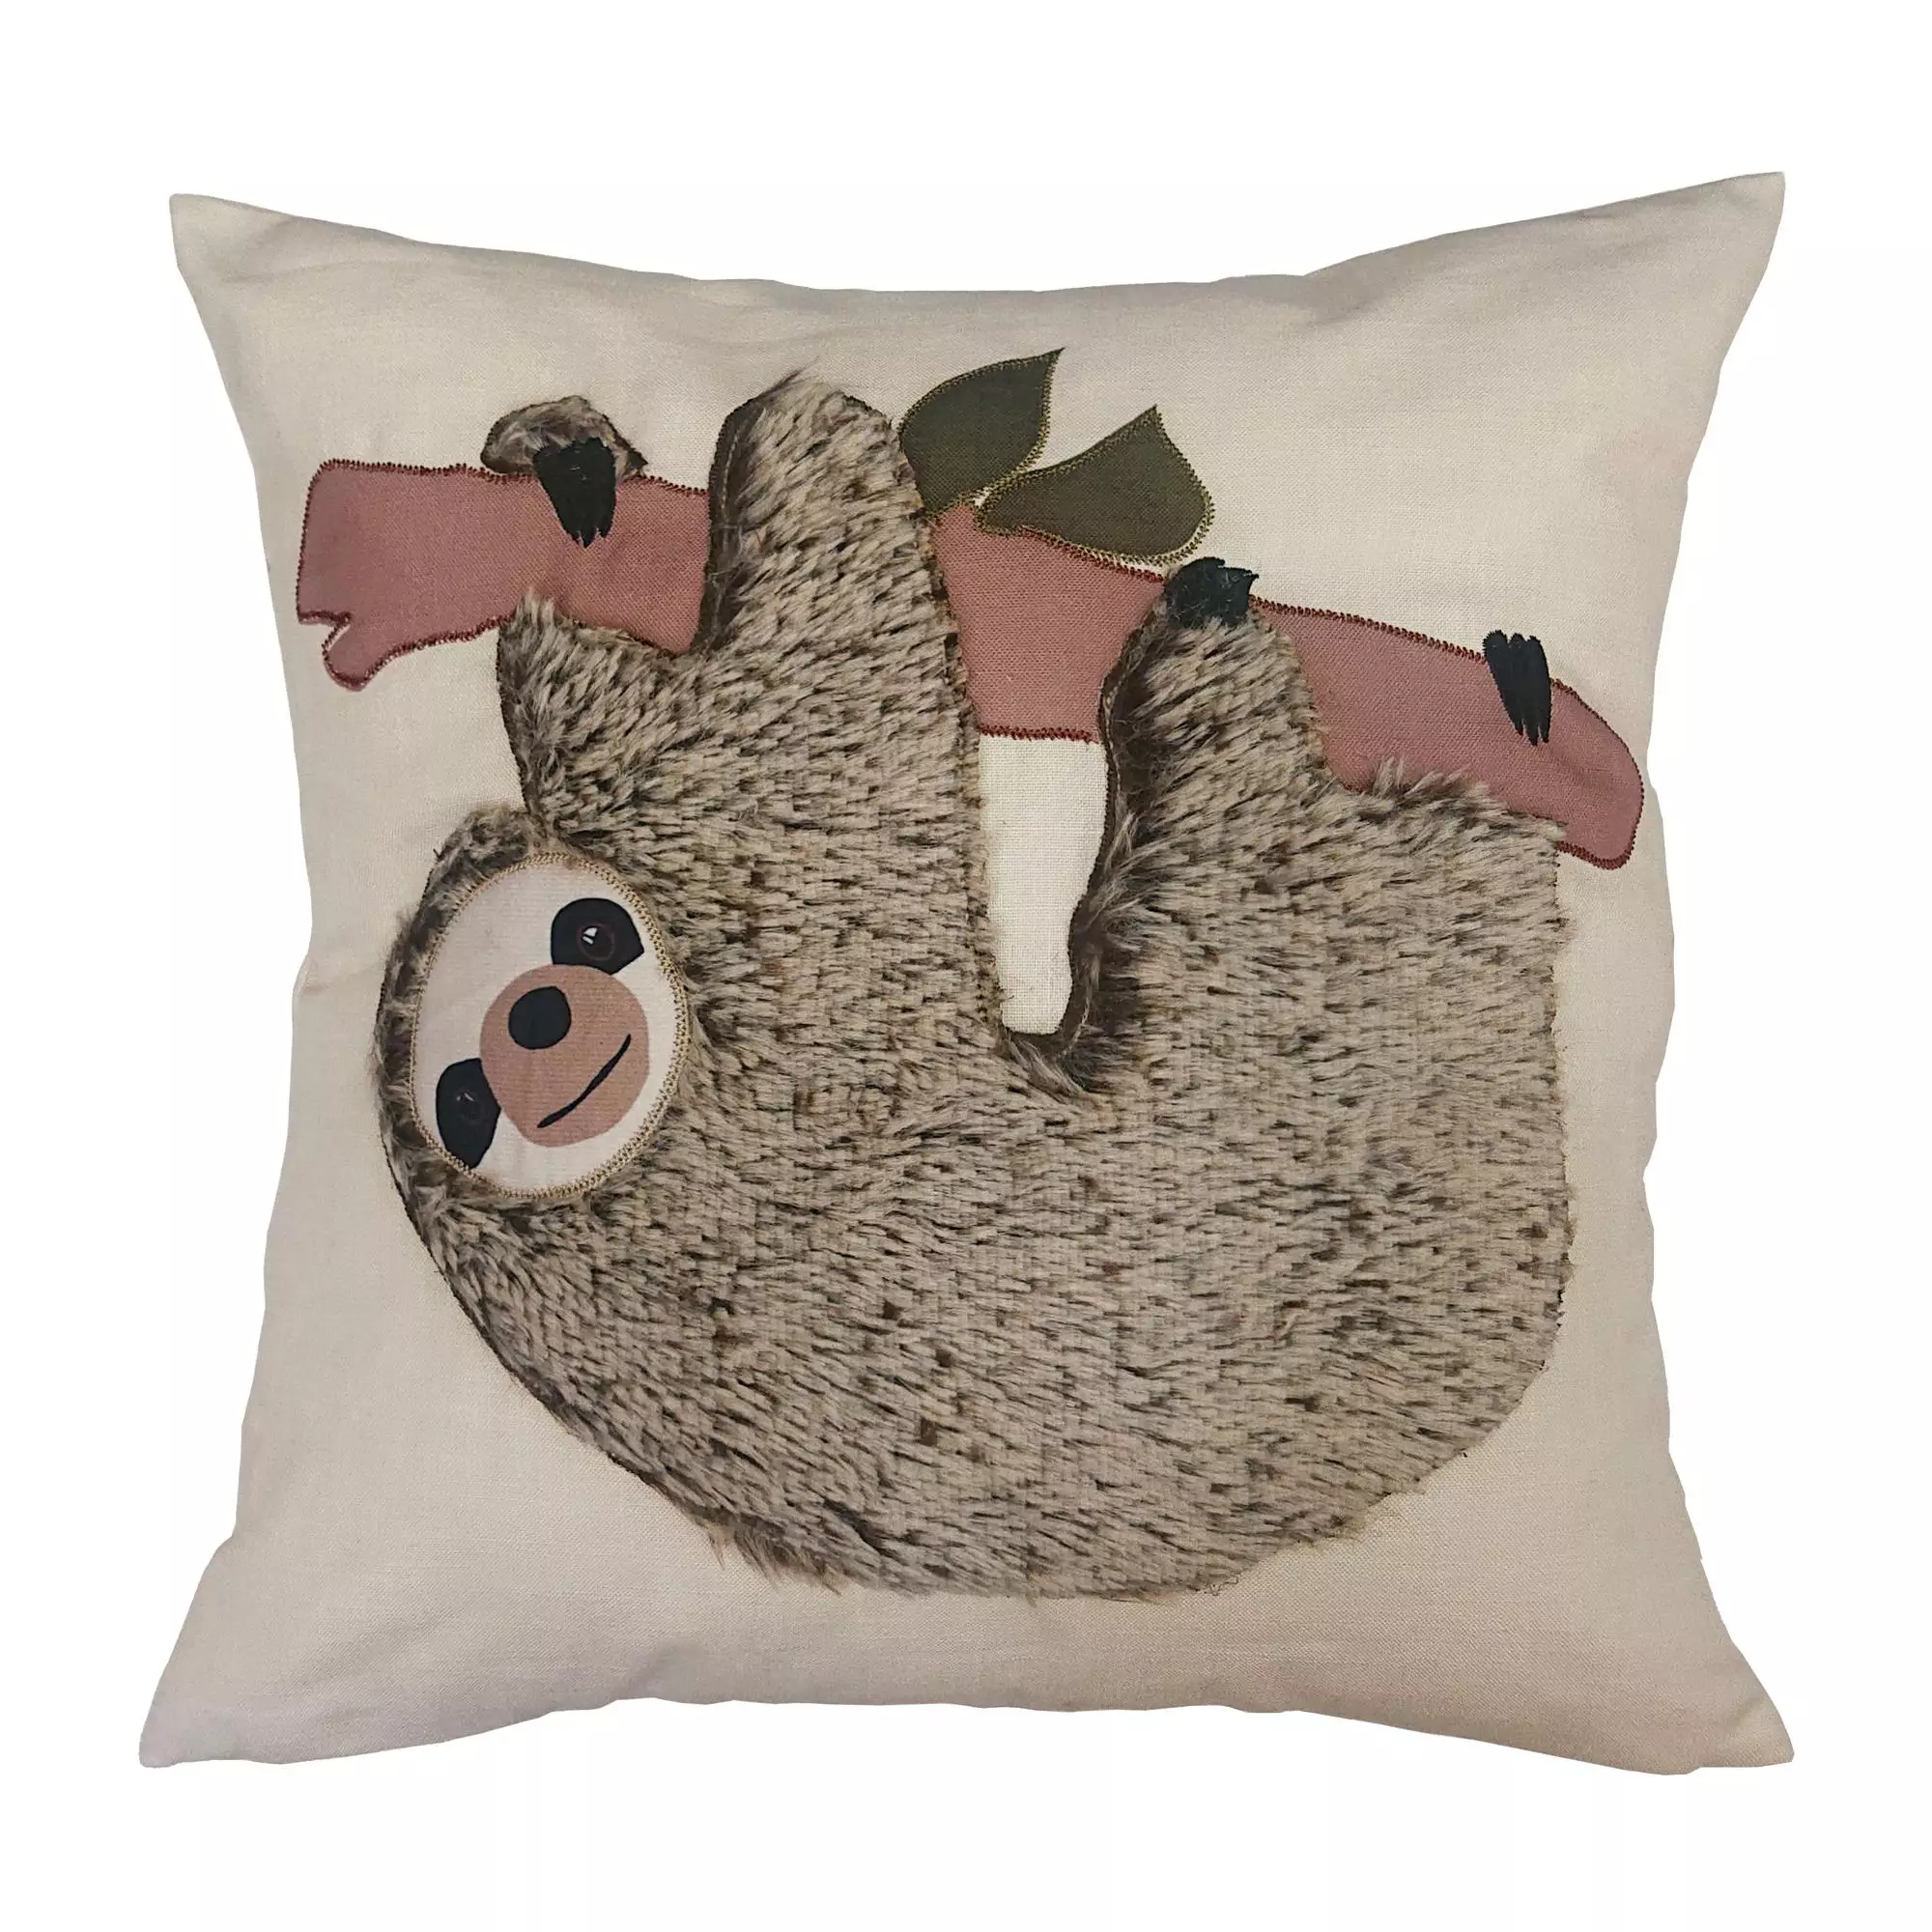 The sloth pillow isn't one to miss